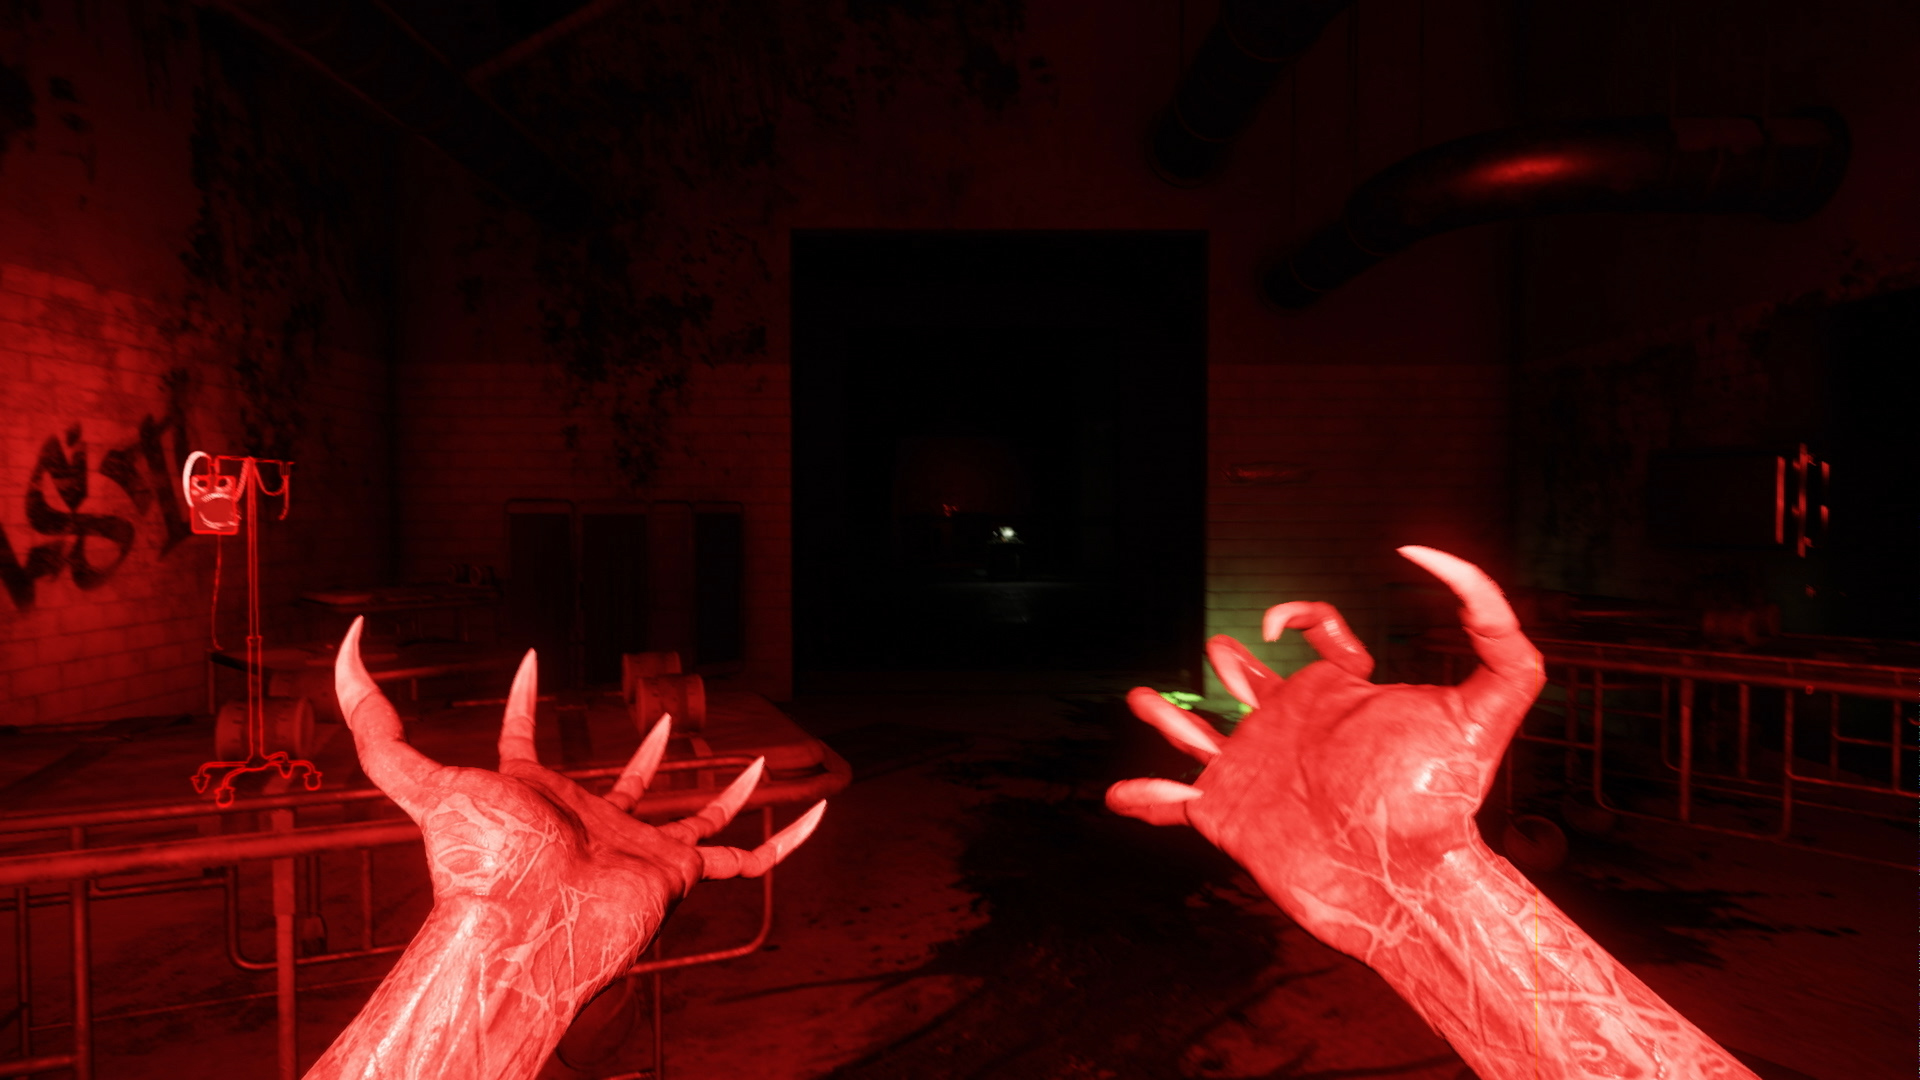 Games like Among Us: a transformed monster with his claws out in Deceit.